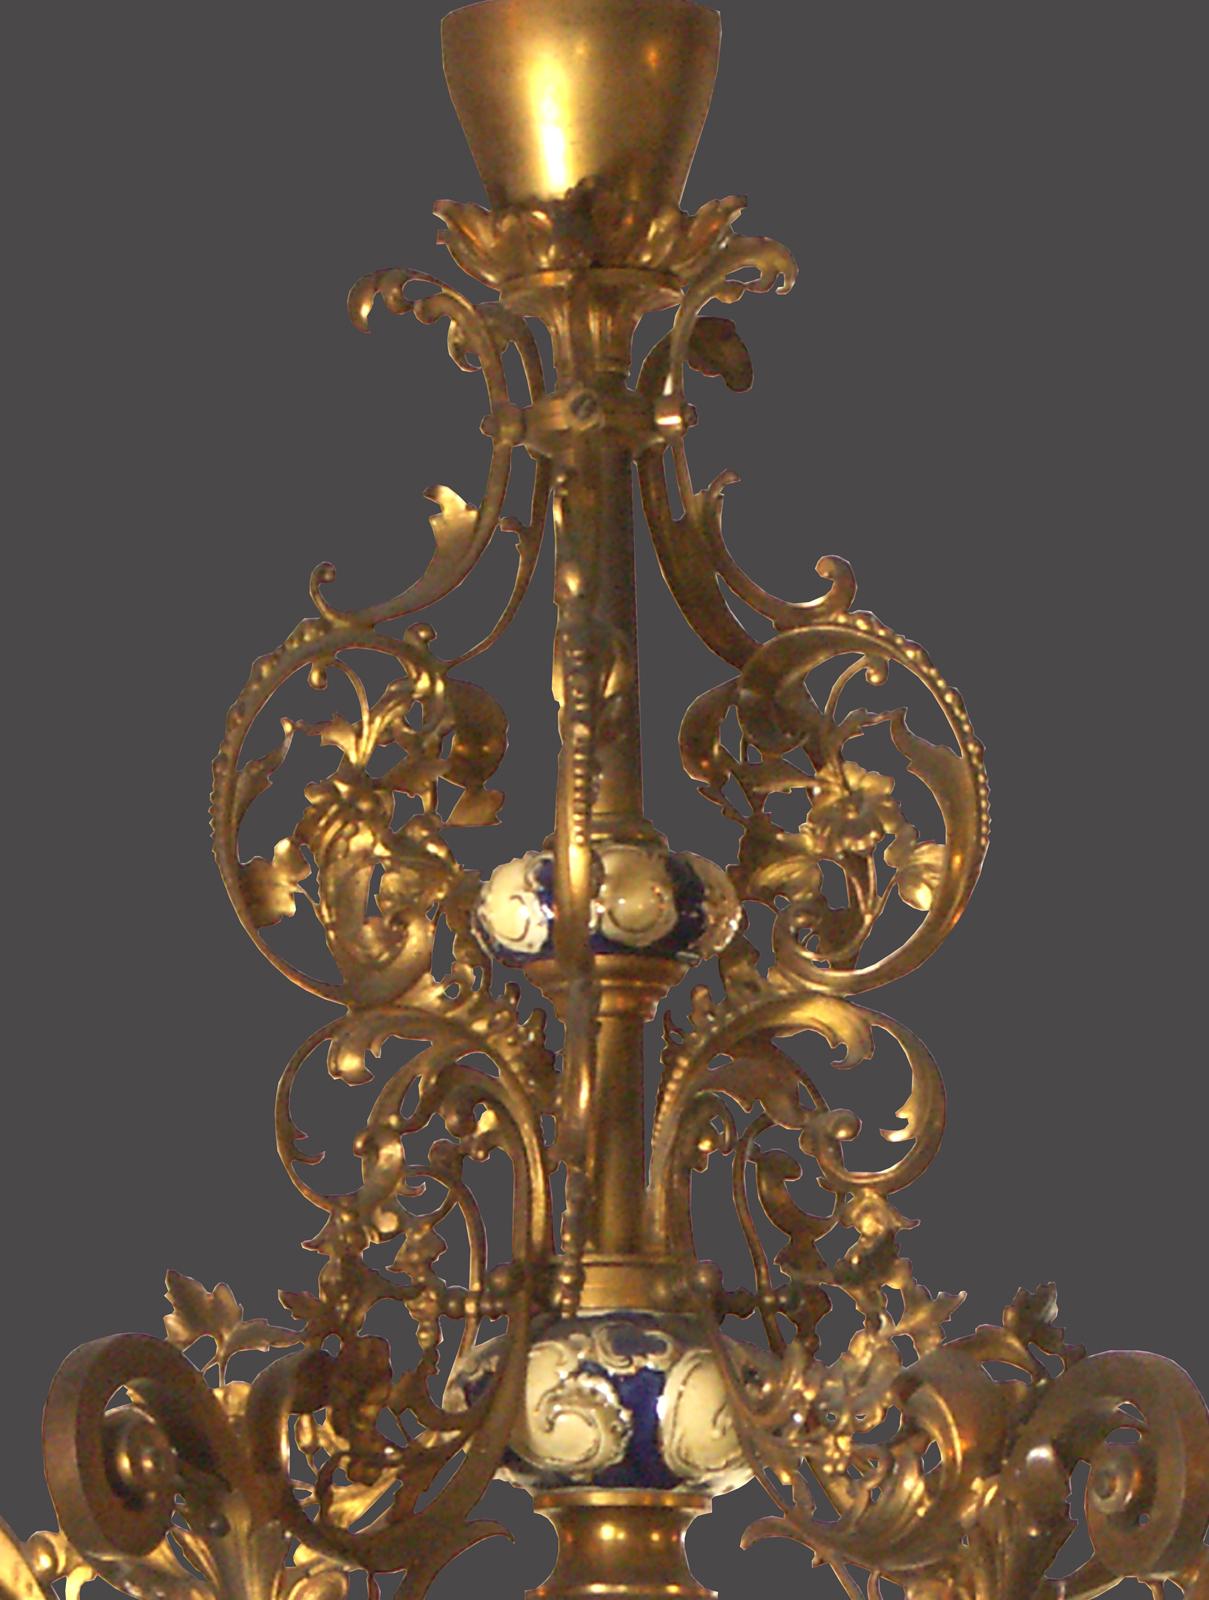 Hand-Crafted Original 19th Historistic Brass and Ceramic Baroque or Rococo Chandelier For Sale